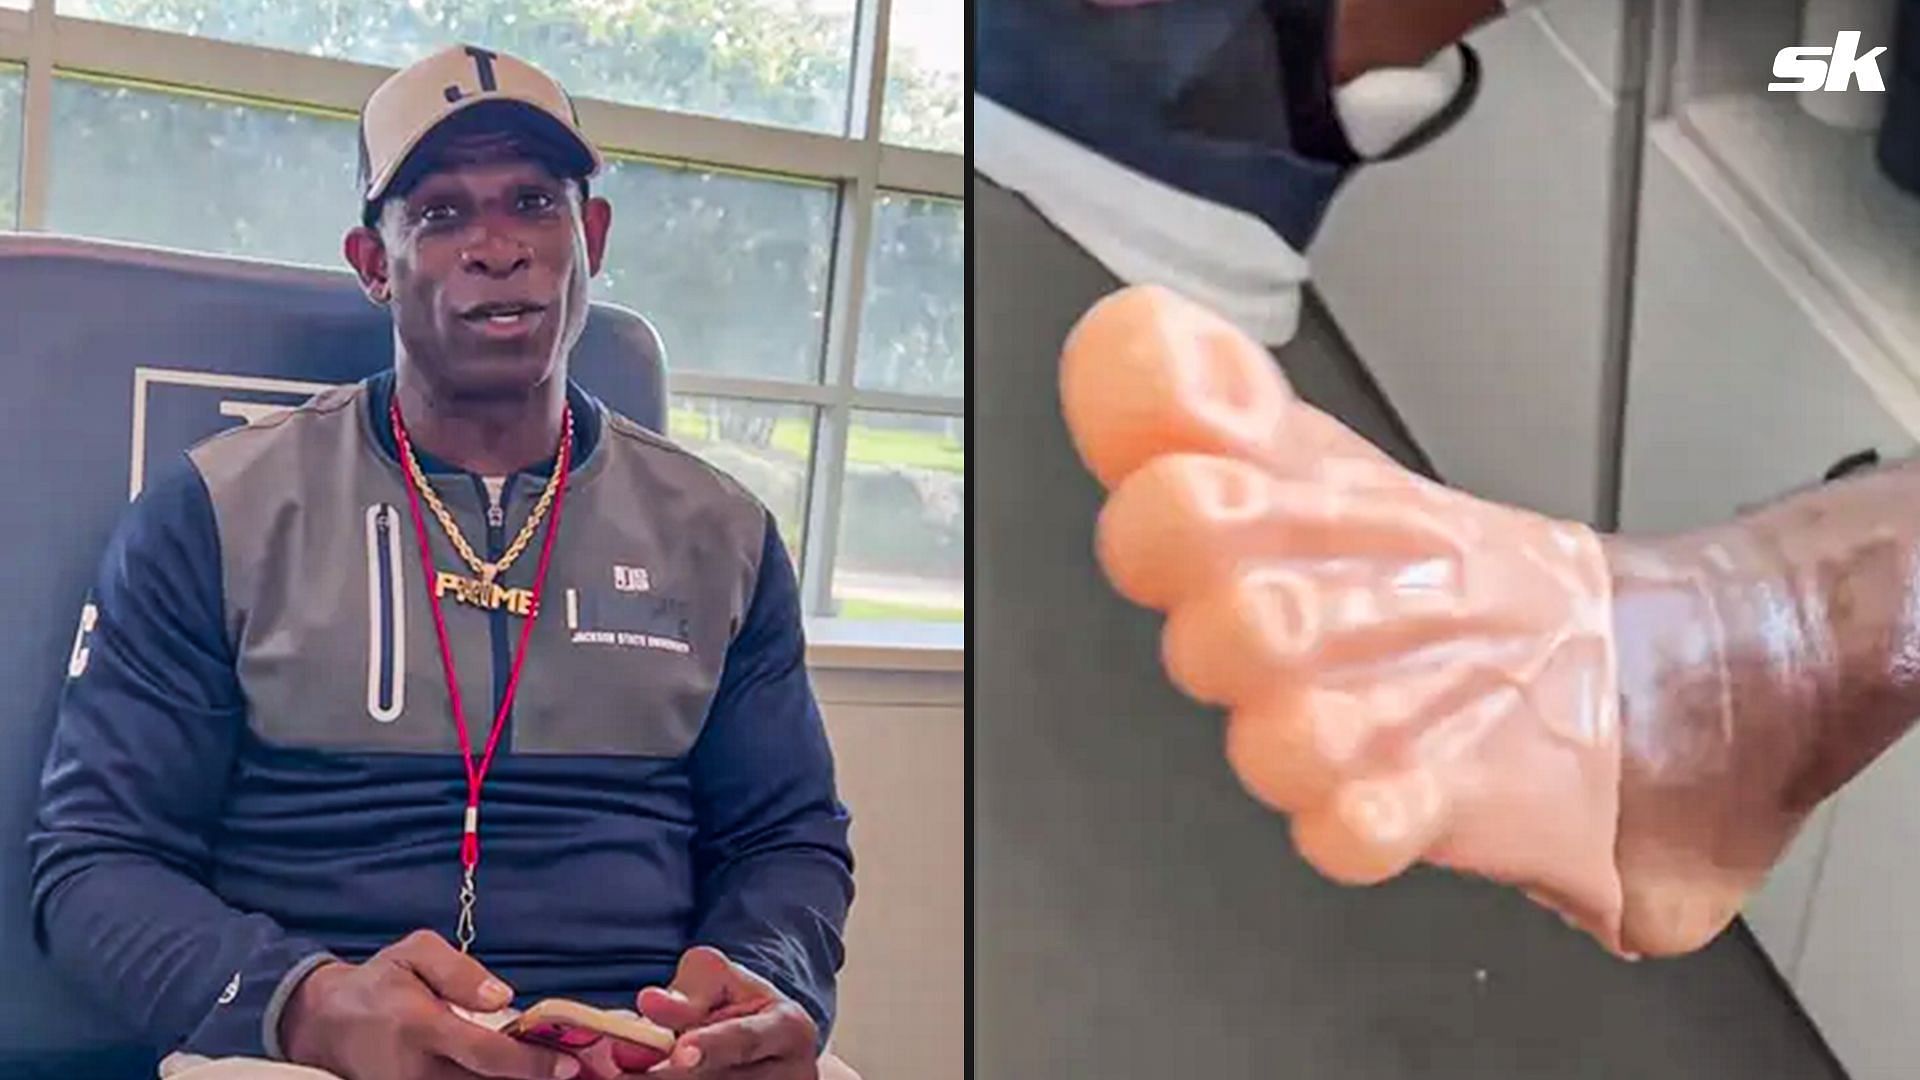 Deion Sanders saw the funny side of a person gifting him artificial toes